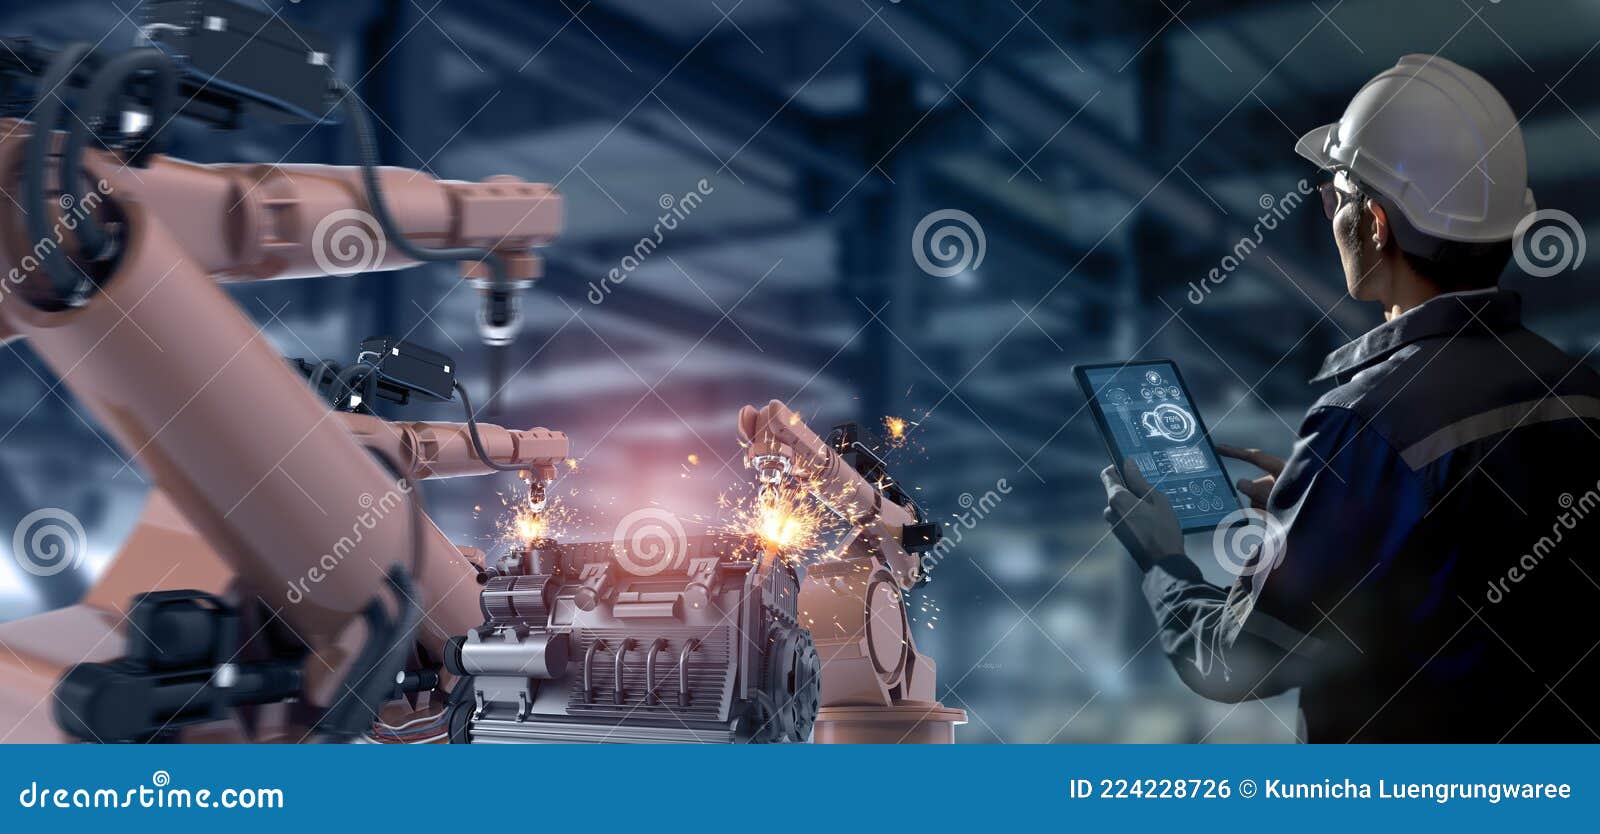 futuristic industry technology concept, engineer using high technology including 5g, artificial intellingence, robot, augmented mi